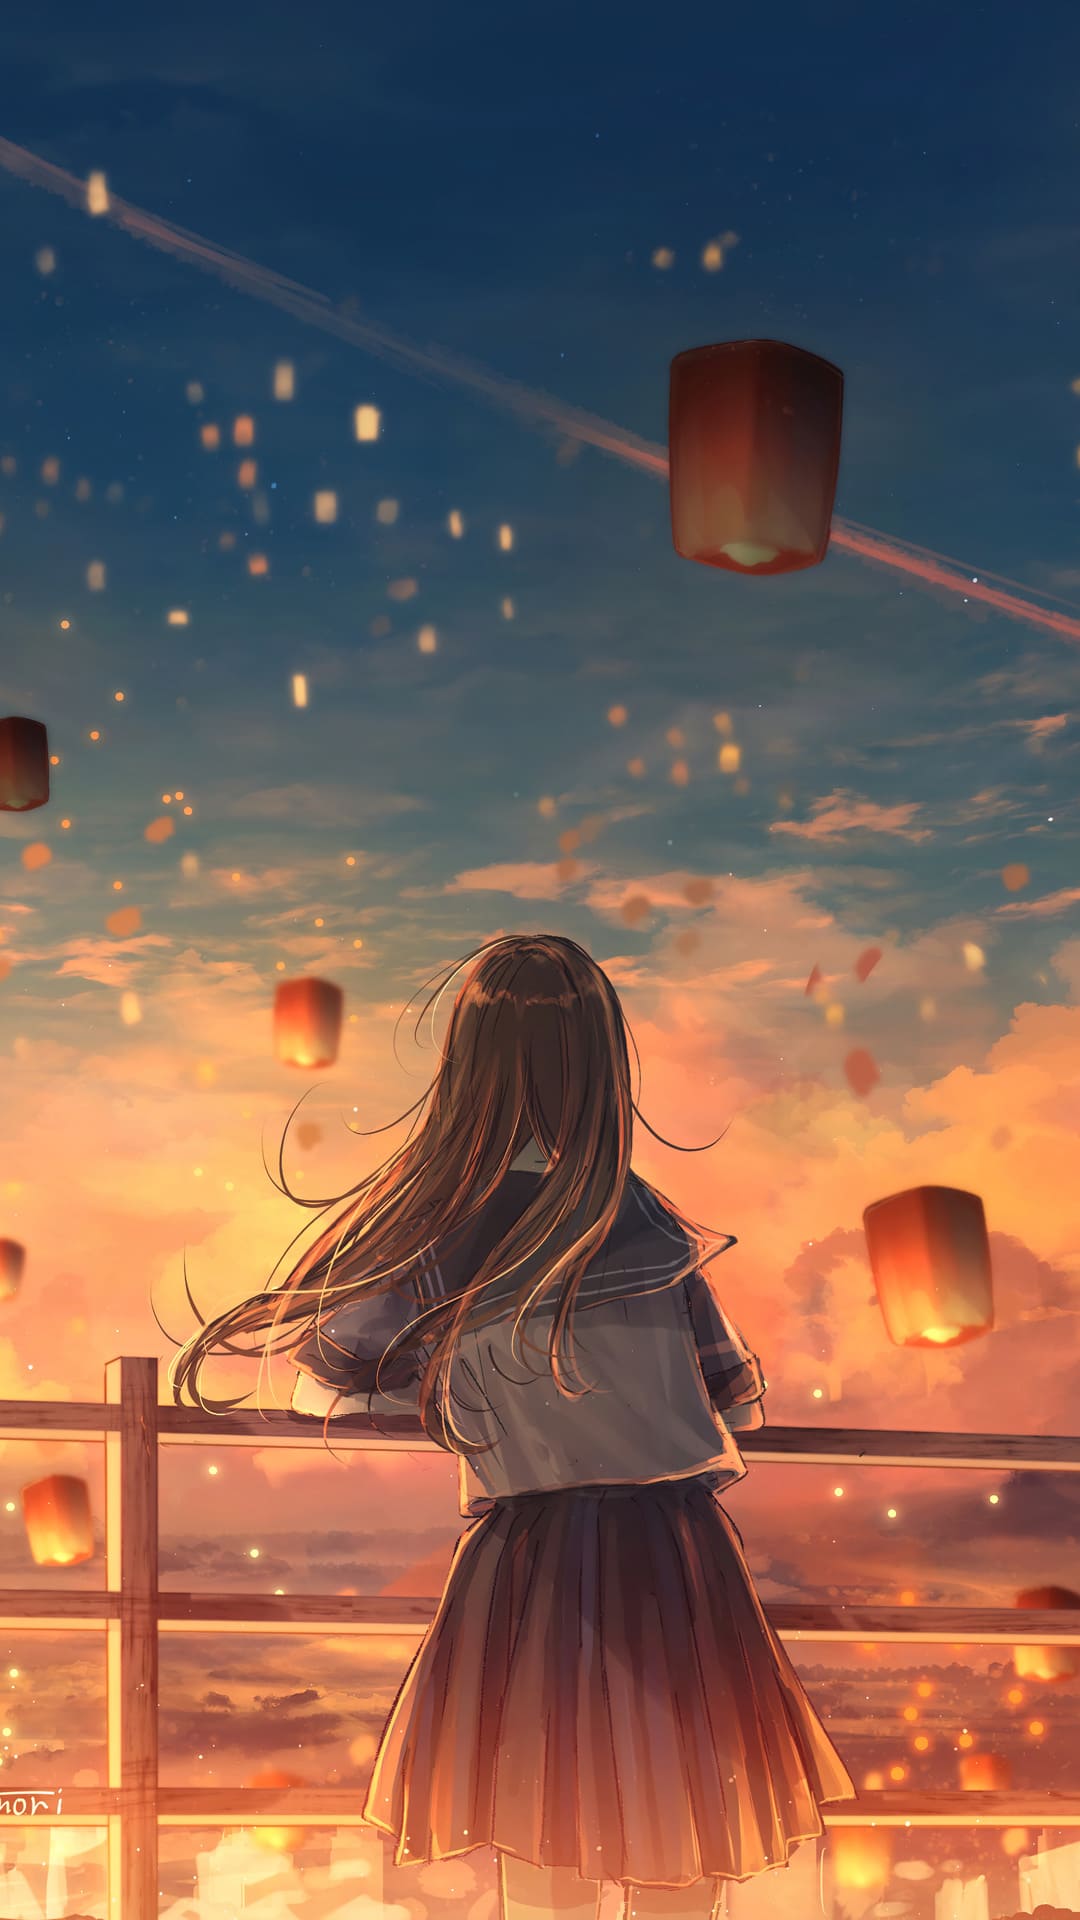 51 Anime Girl Wallpaper Stock Video Footage - 4K and HD Video Clips |  Shutterstock